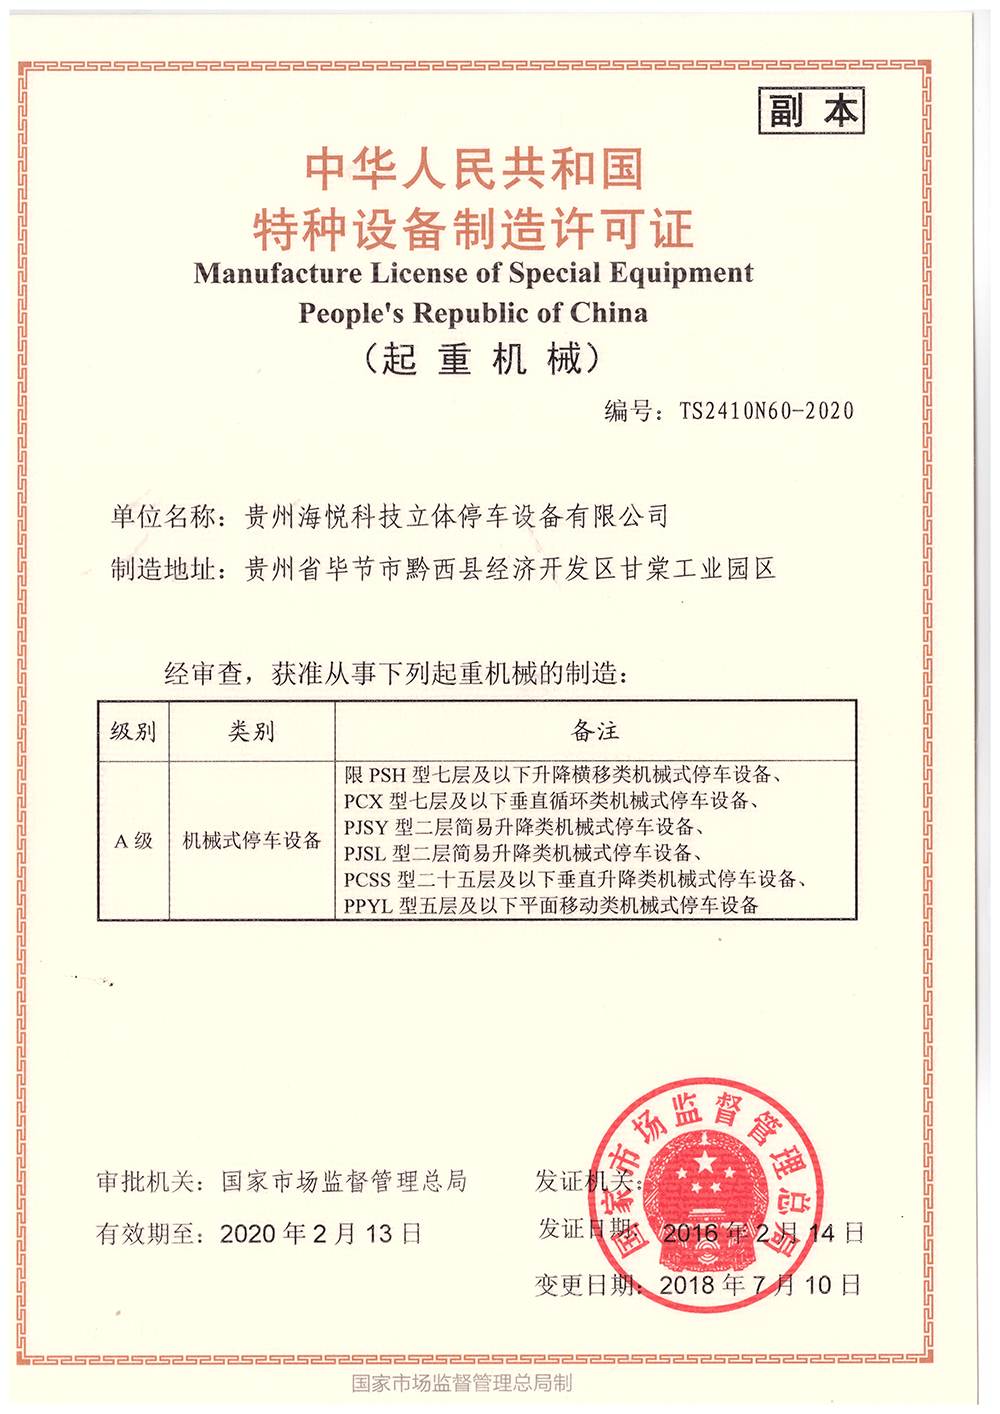 People's Republic of China special equipment manufacturing license - (copy)